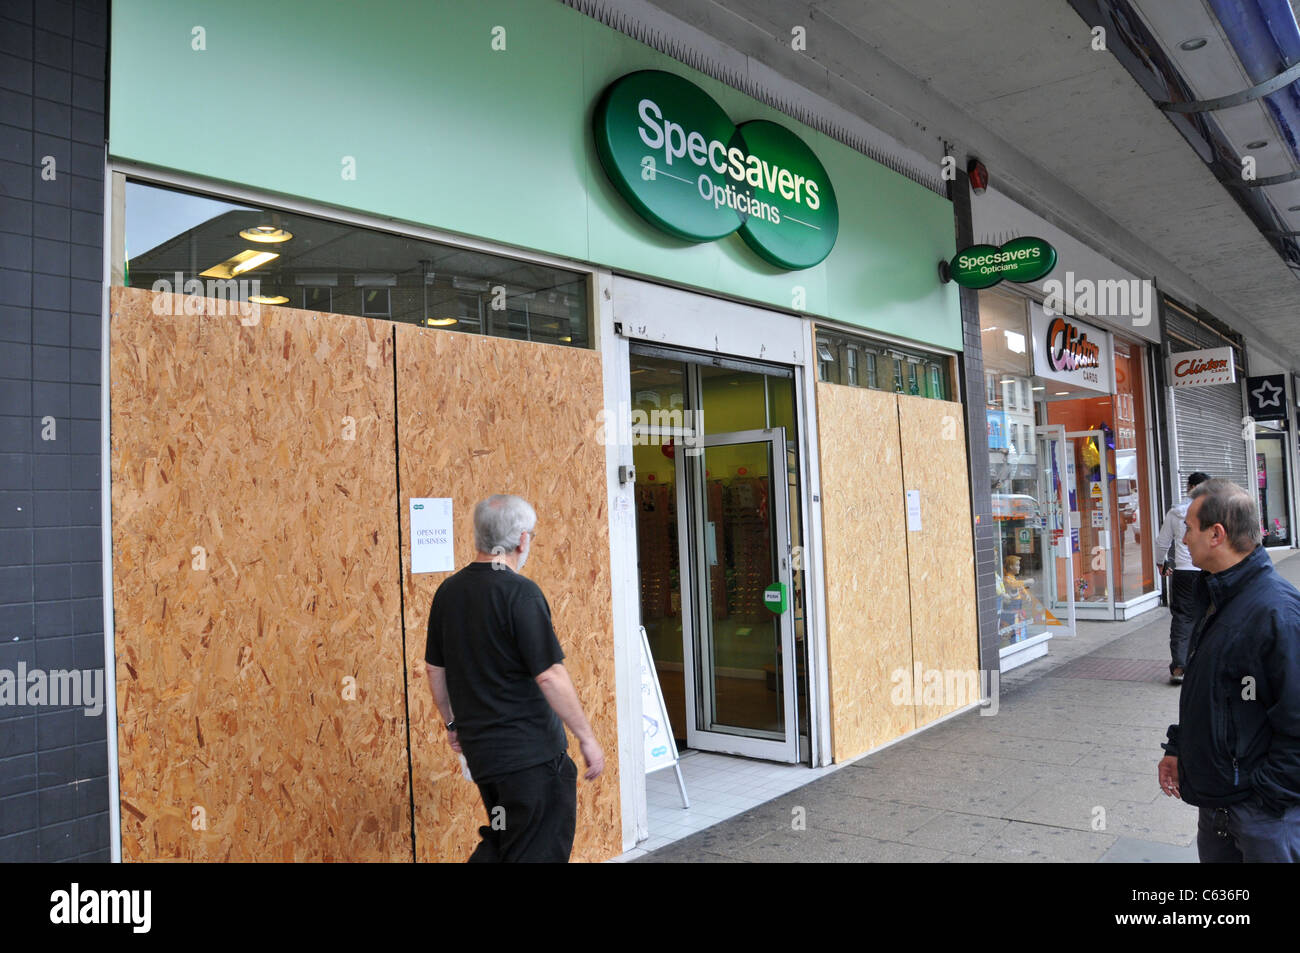 Specsavers Wood Green London Riots looted shops Wood Green London Riots looted shops boarded up smashed windows Stock Photo